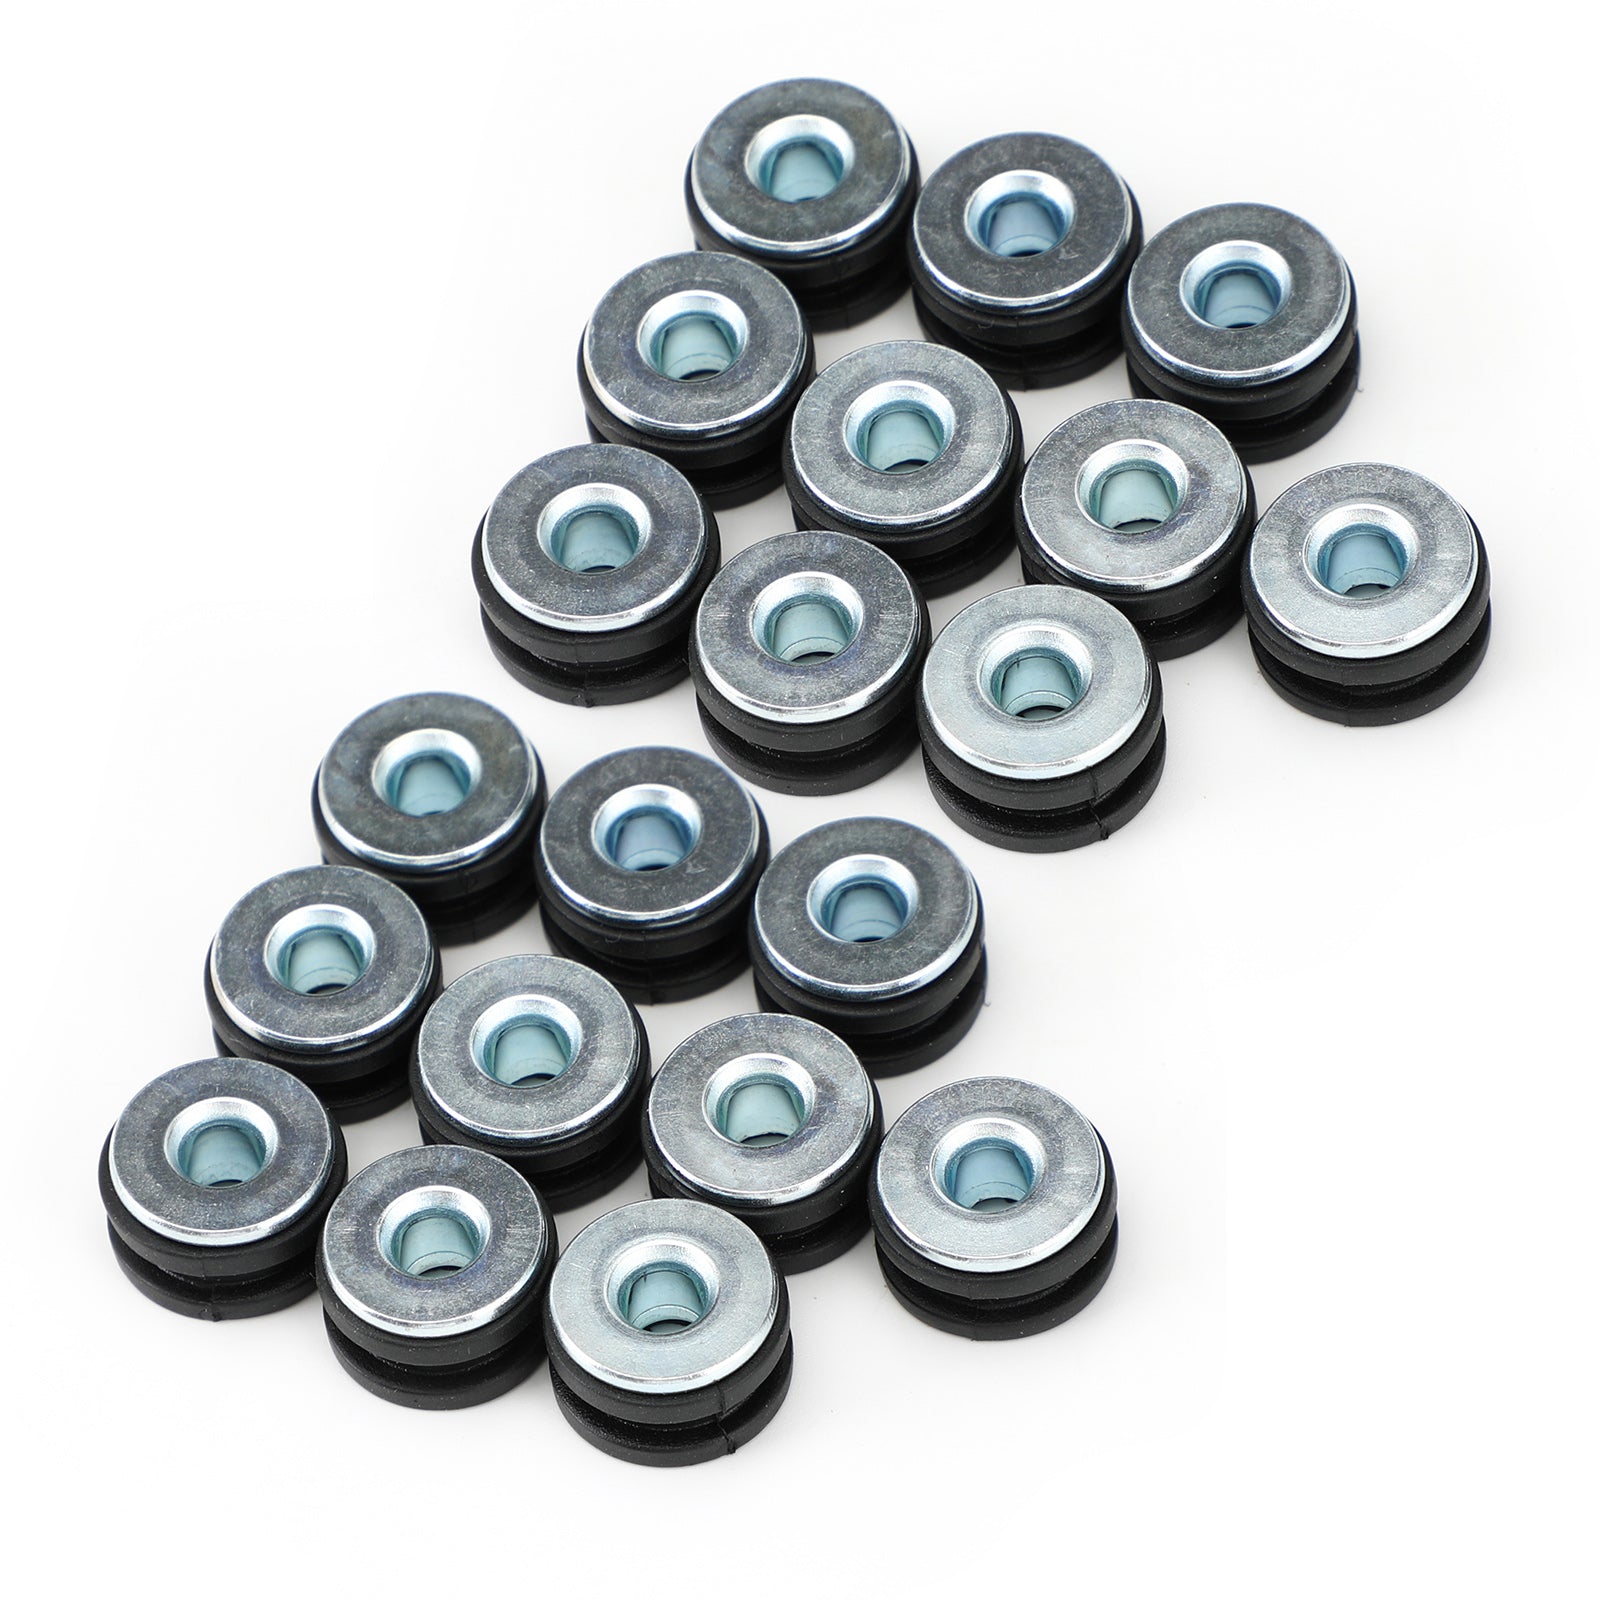 20 Pack Motorcycle Rubber Grommets Assortment Fit for Suzuki Fairing Universal